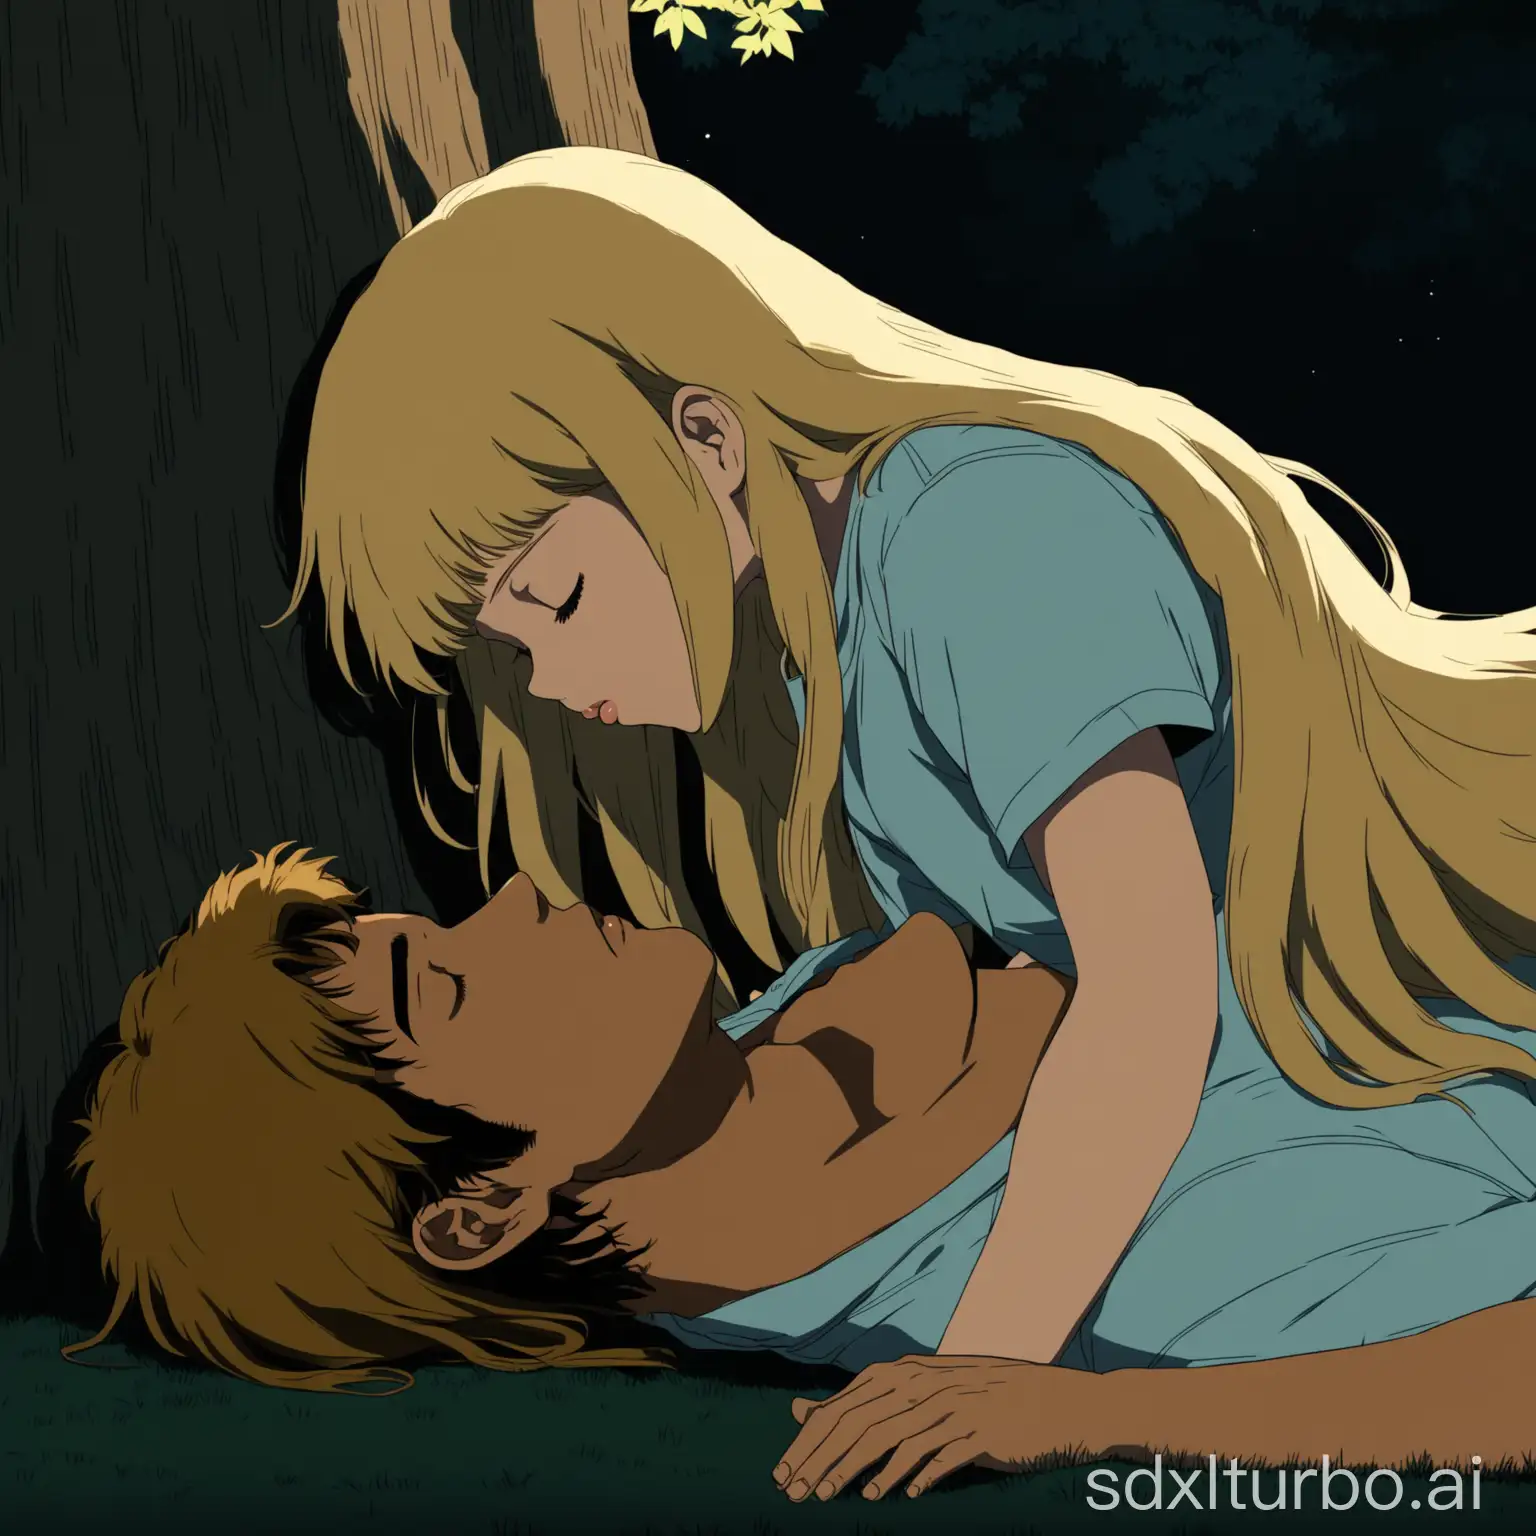 Romantic-Moment-Young-Couple-Kissing-Under-Tree-in-Anime-Style